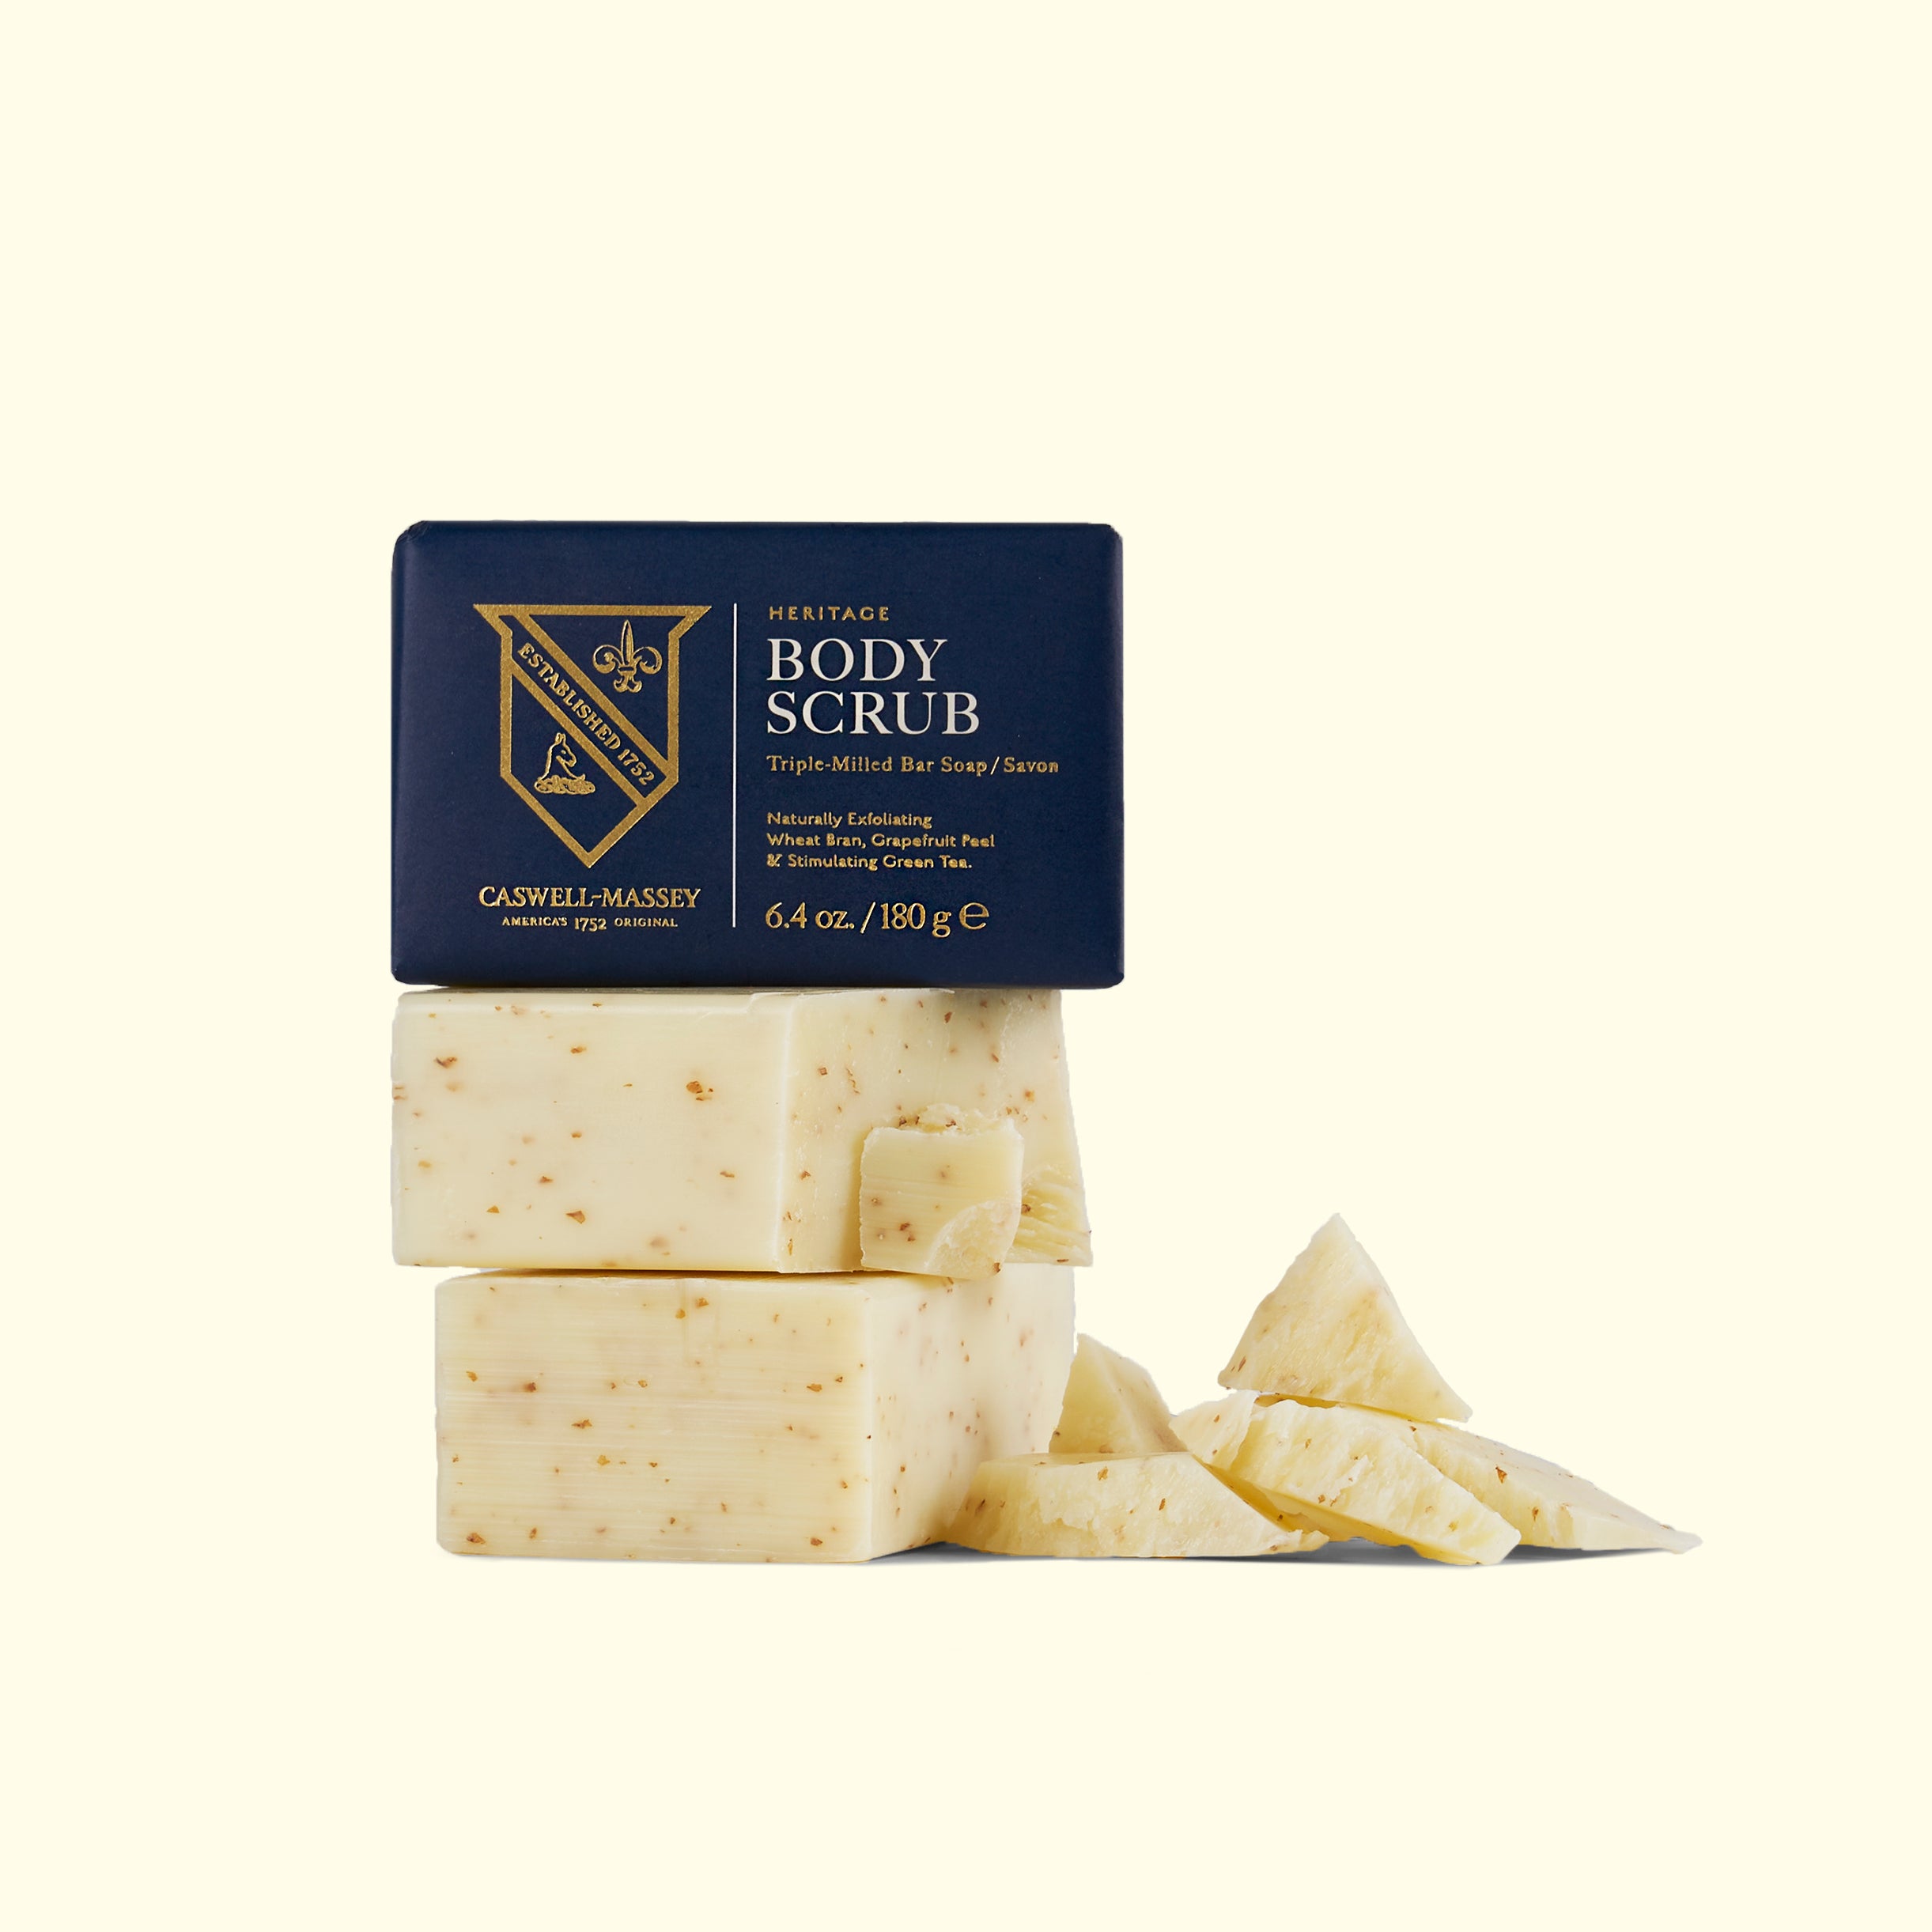 Caswell-Massey Heritage Scrub Bar Exfoliating Bar Soap: image of three bars stacked on top of one another